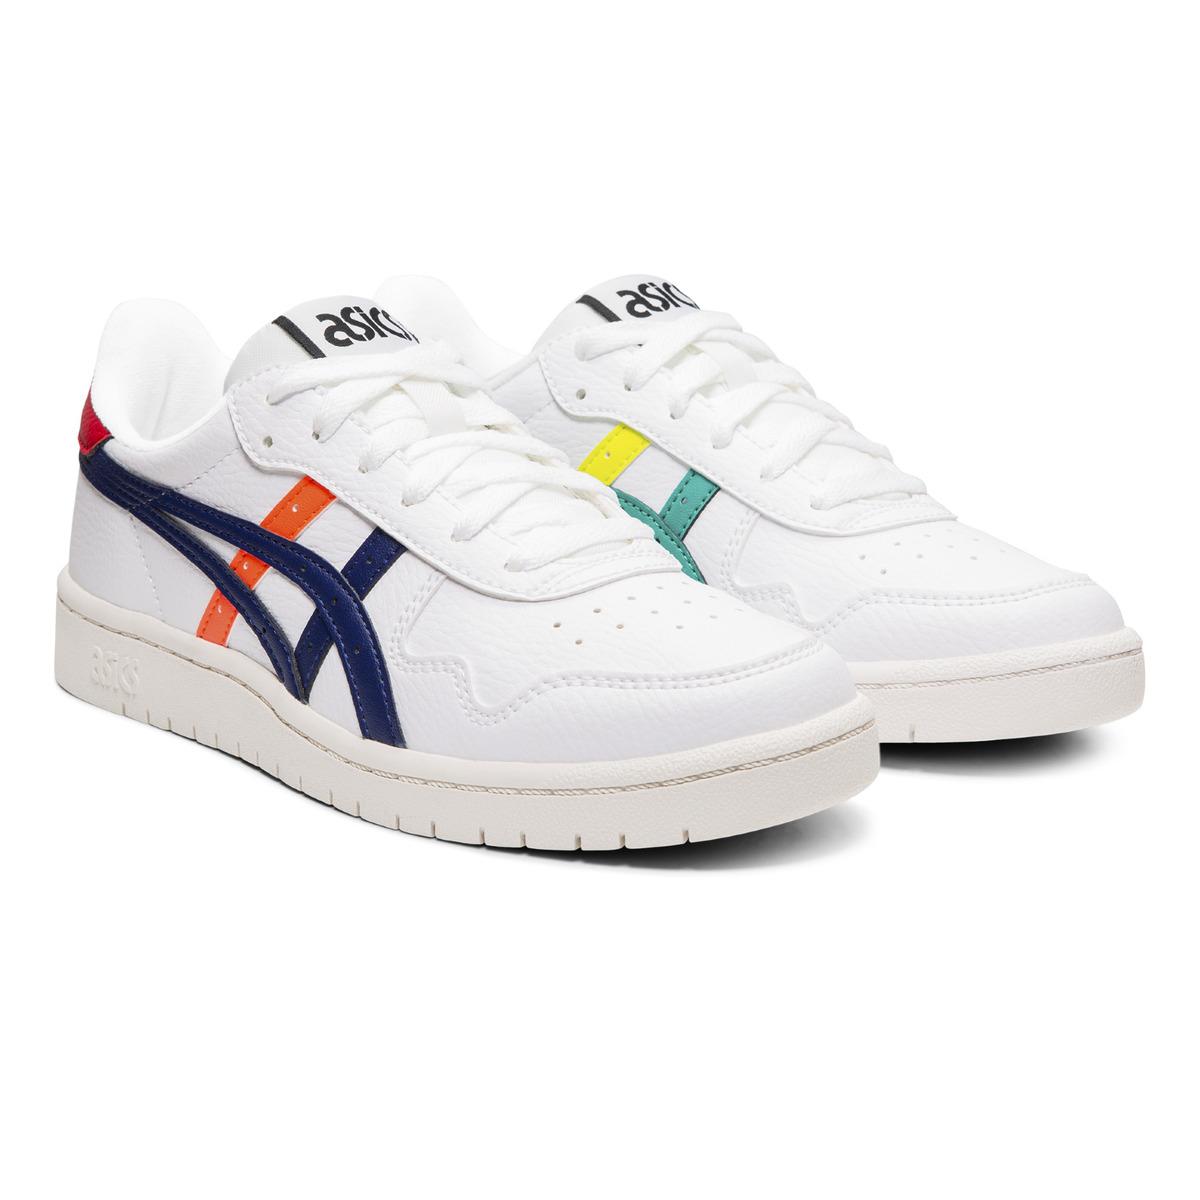 Asics Leather Sportstyle Japan S Casual Trainers in White / Blue (Blue ...